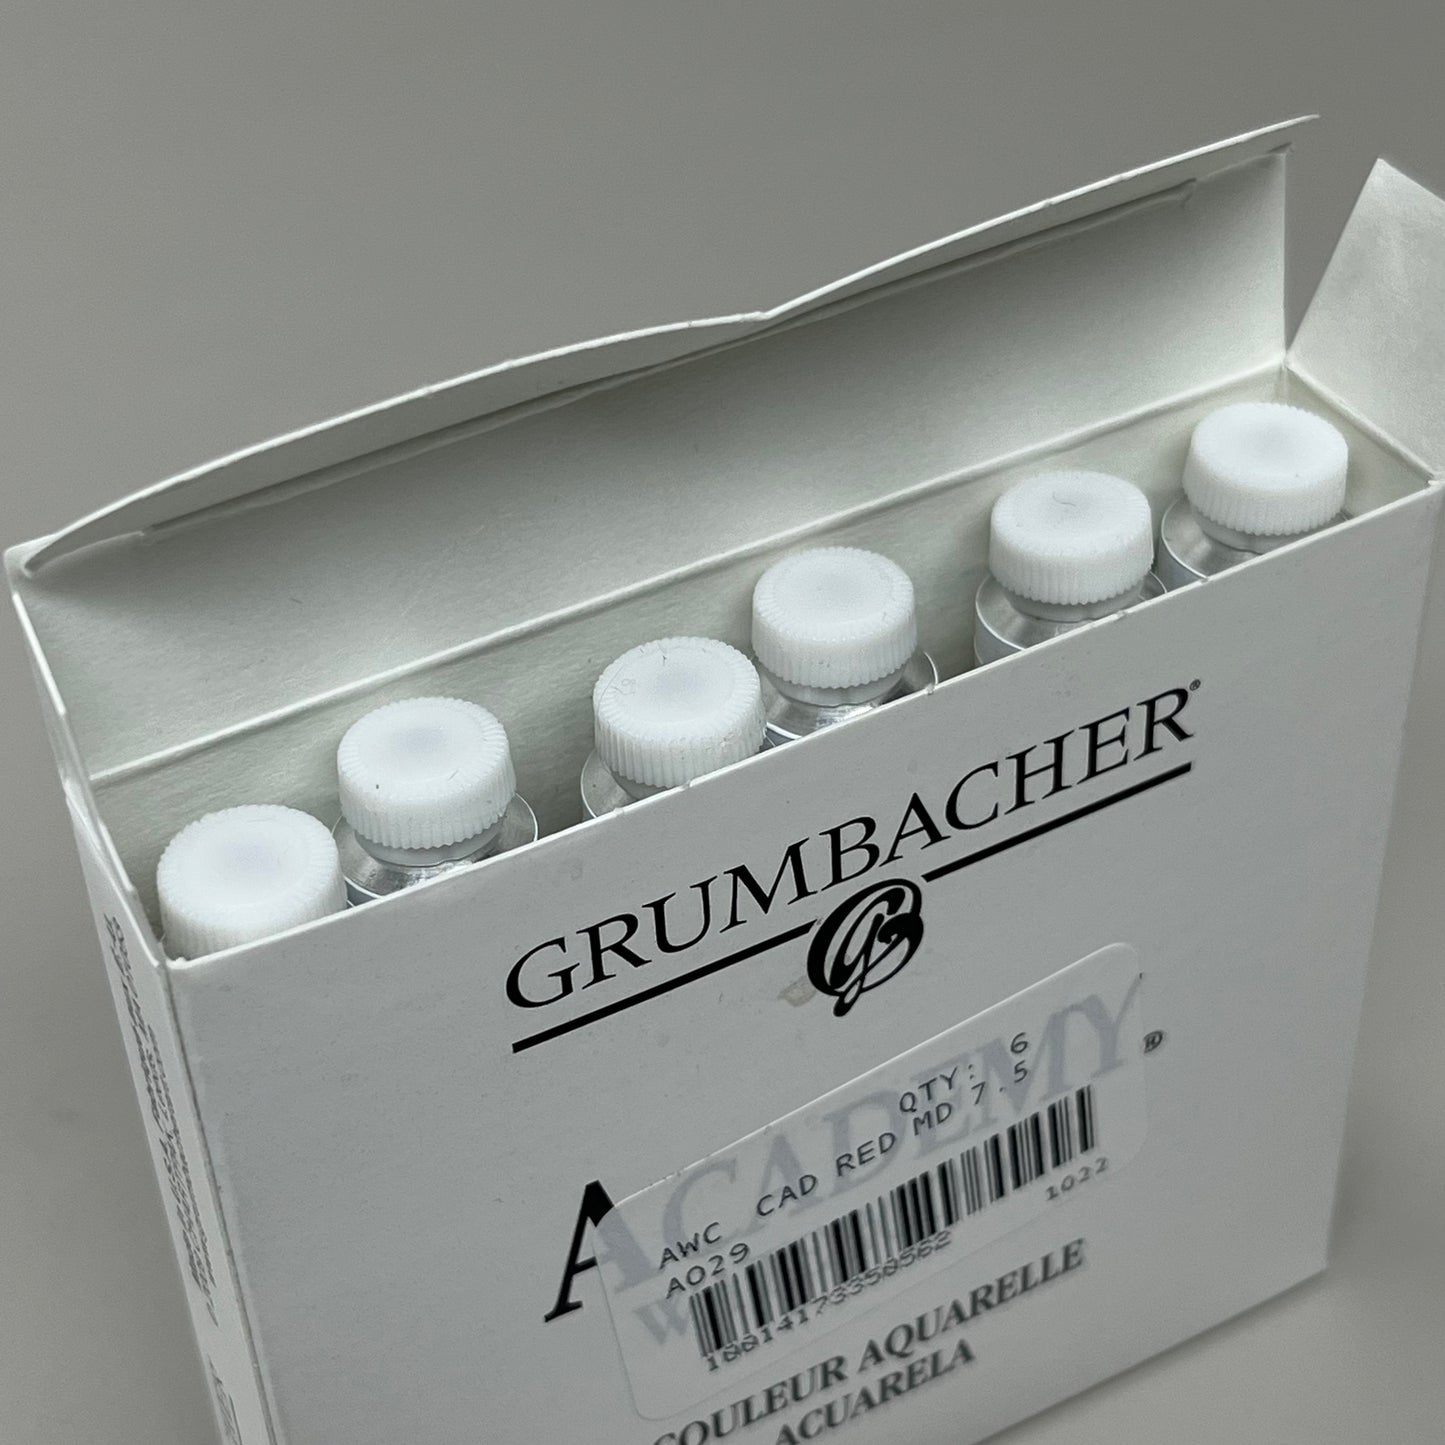 GRUMBACHER 6-PACK! Watercolor Paint Academy Cad Red MD .25 fl oz / 7.5 ml A029 (New)